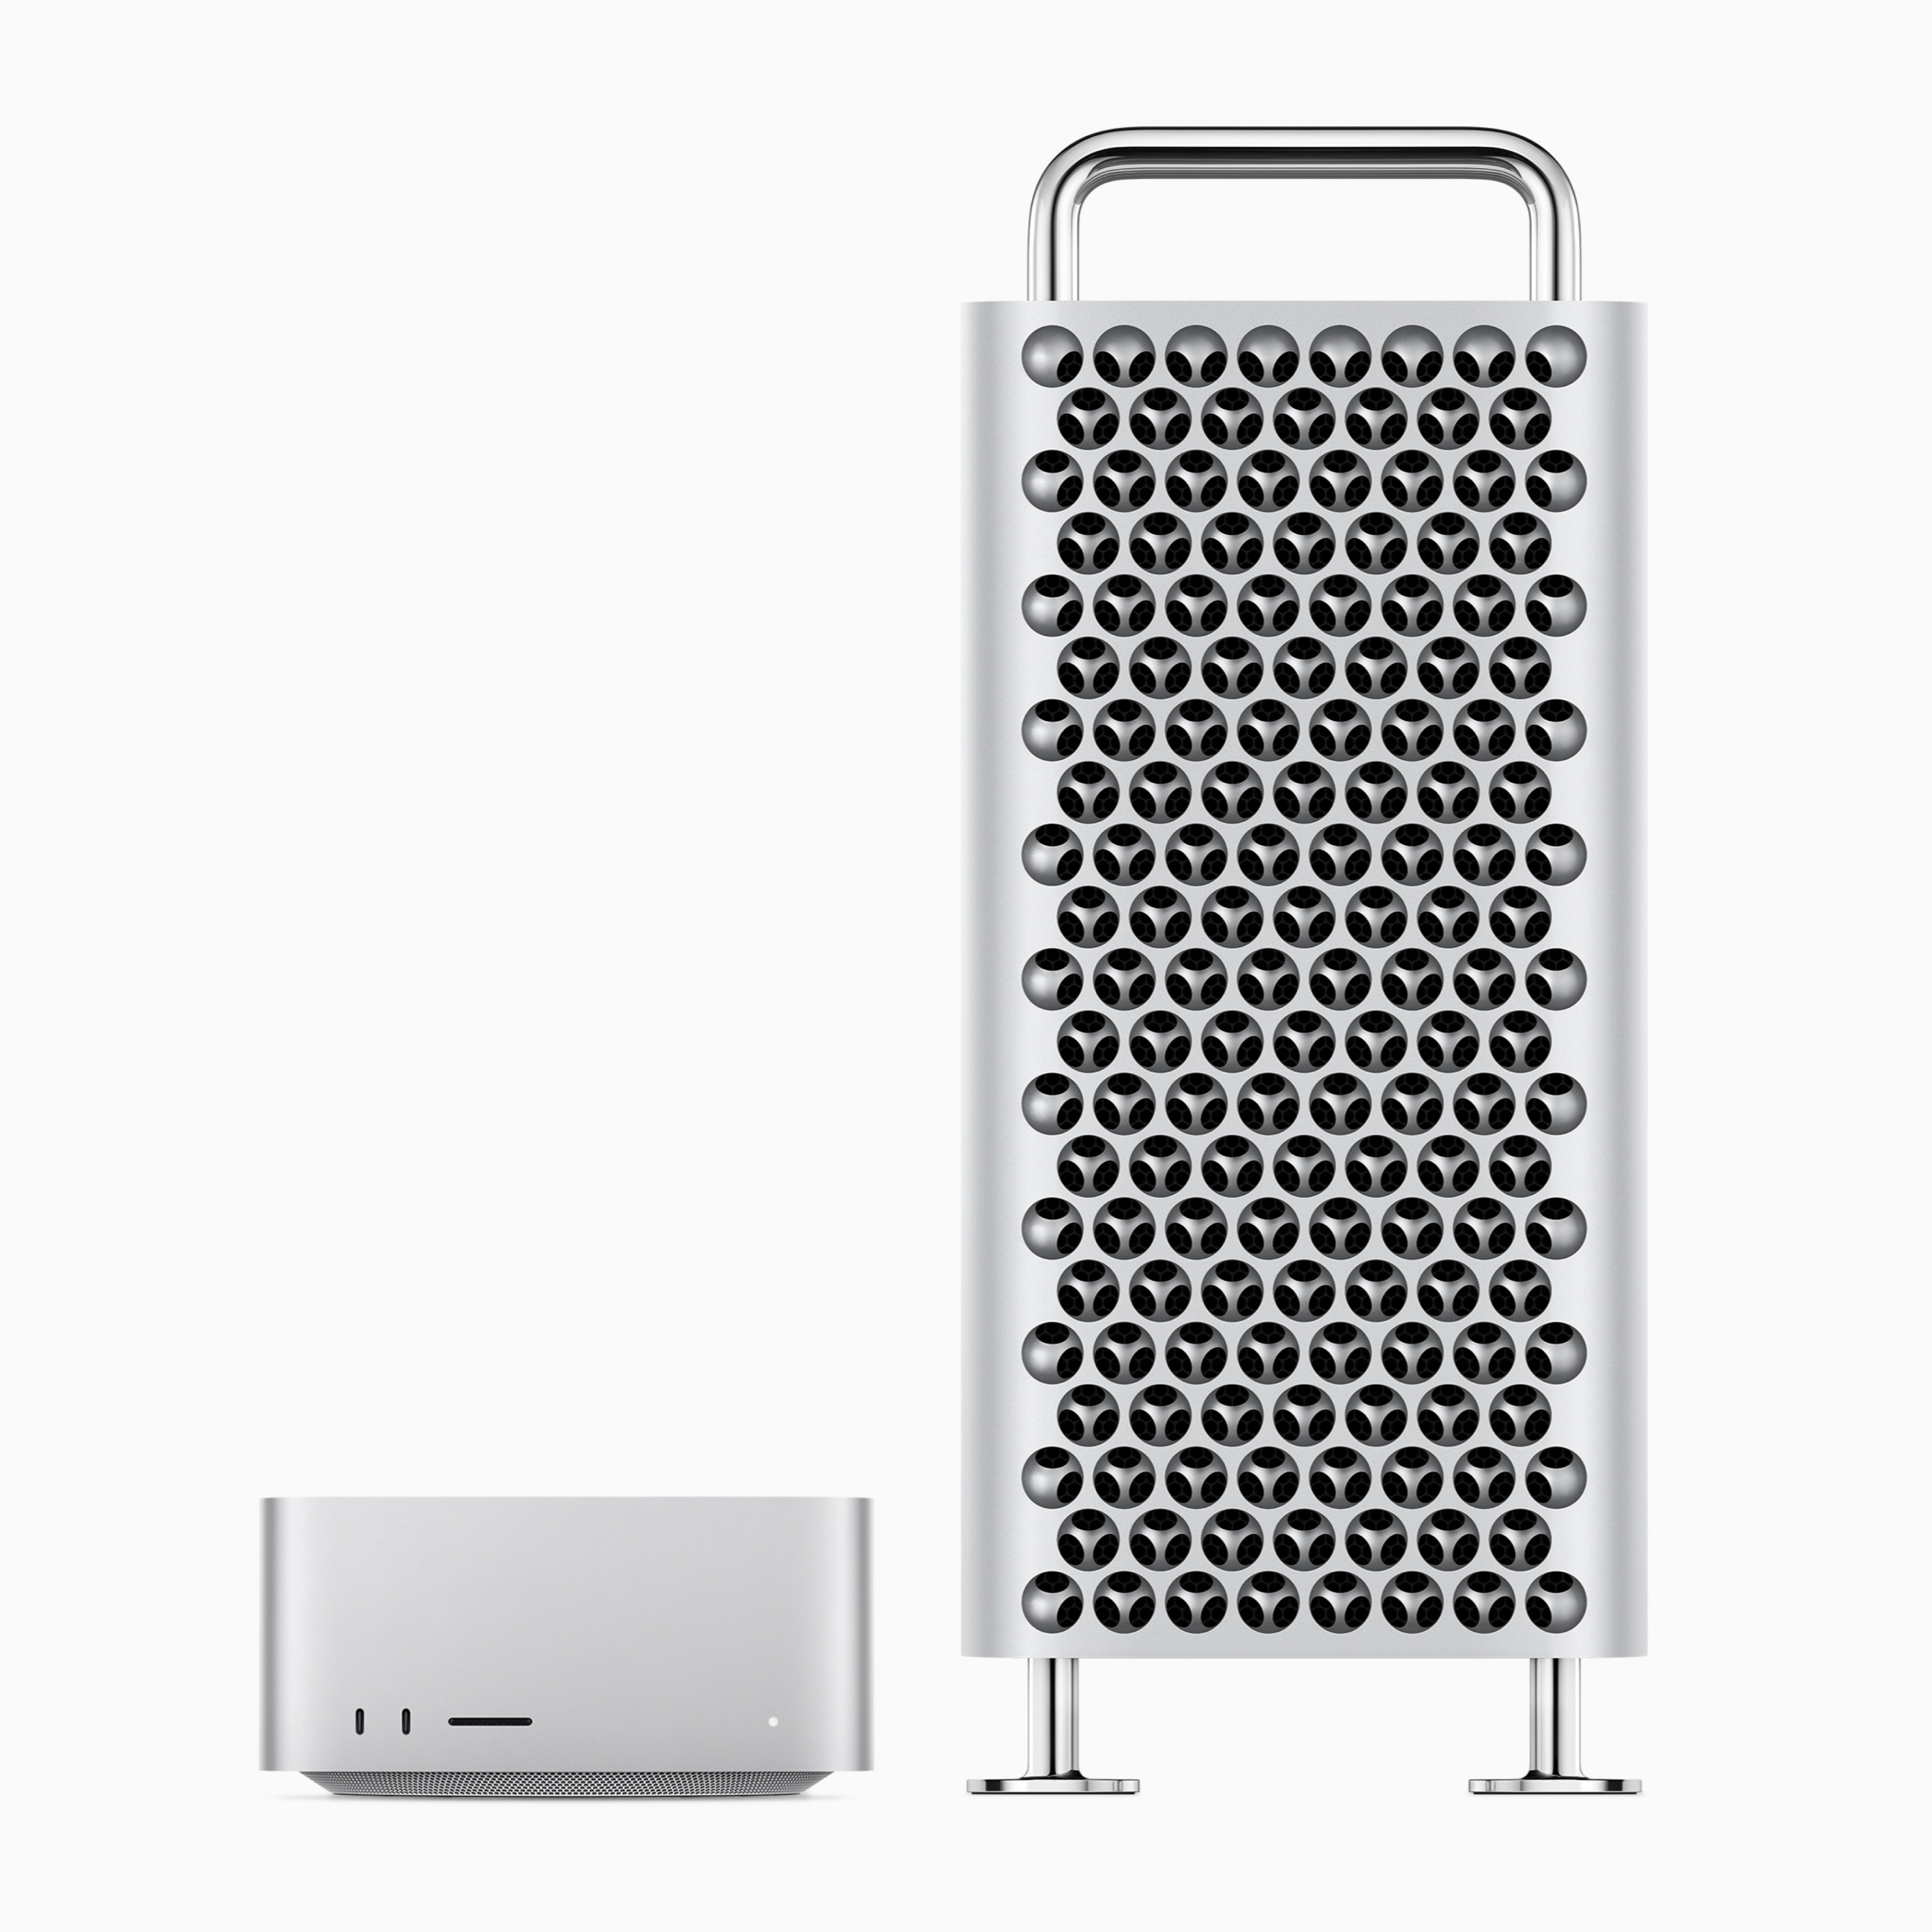 Apple unveils new Mac Studio and brings Apple silicon to Mac Pro